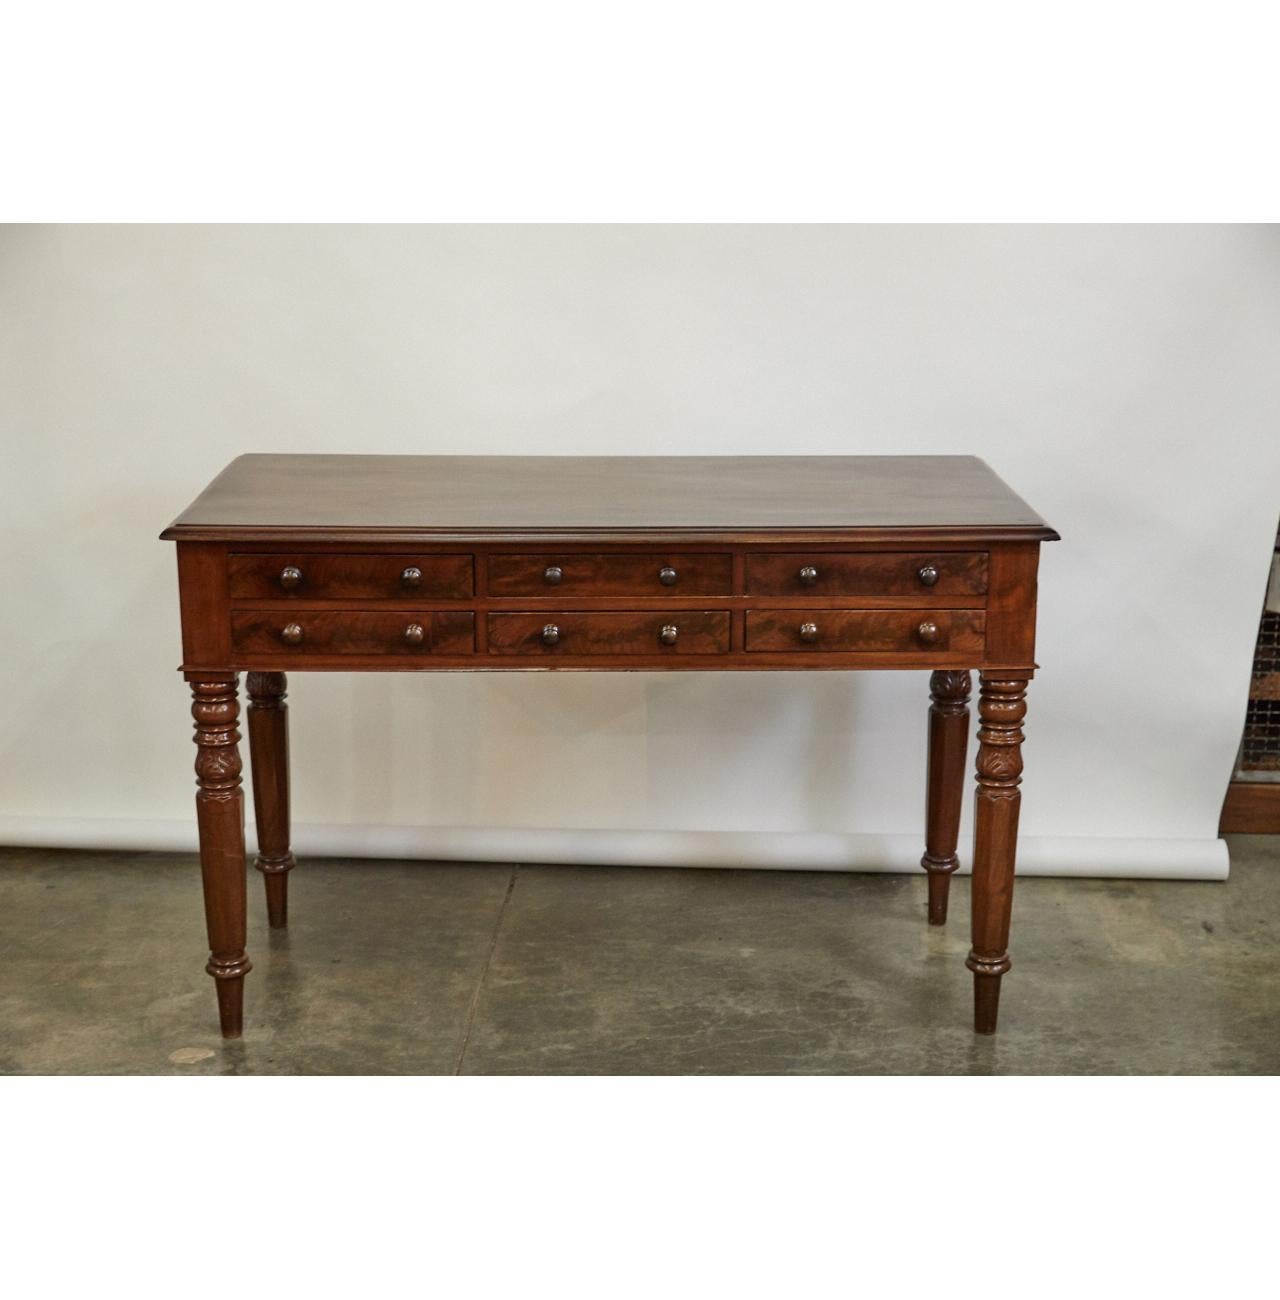 This impressive mahogany server with walnut veneer is from the first quarter of the 19th century. Made with fine craftsmanship, the piece has six drawers and intricate turned and carved tapered legs. The piece shows signs of old repairs.

     